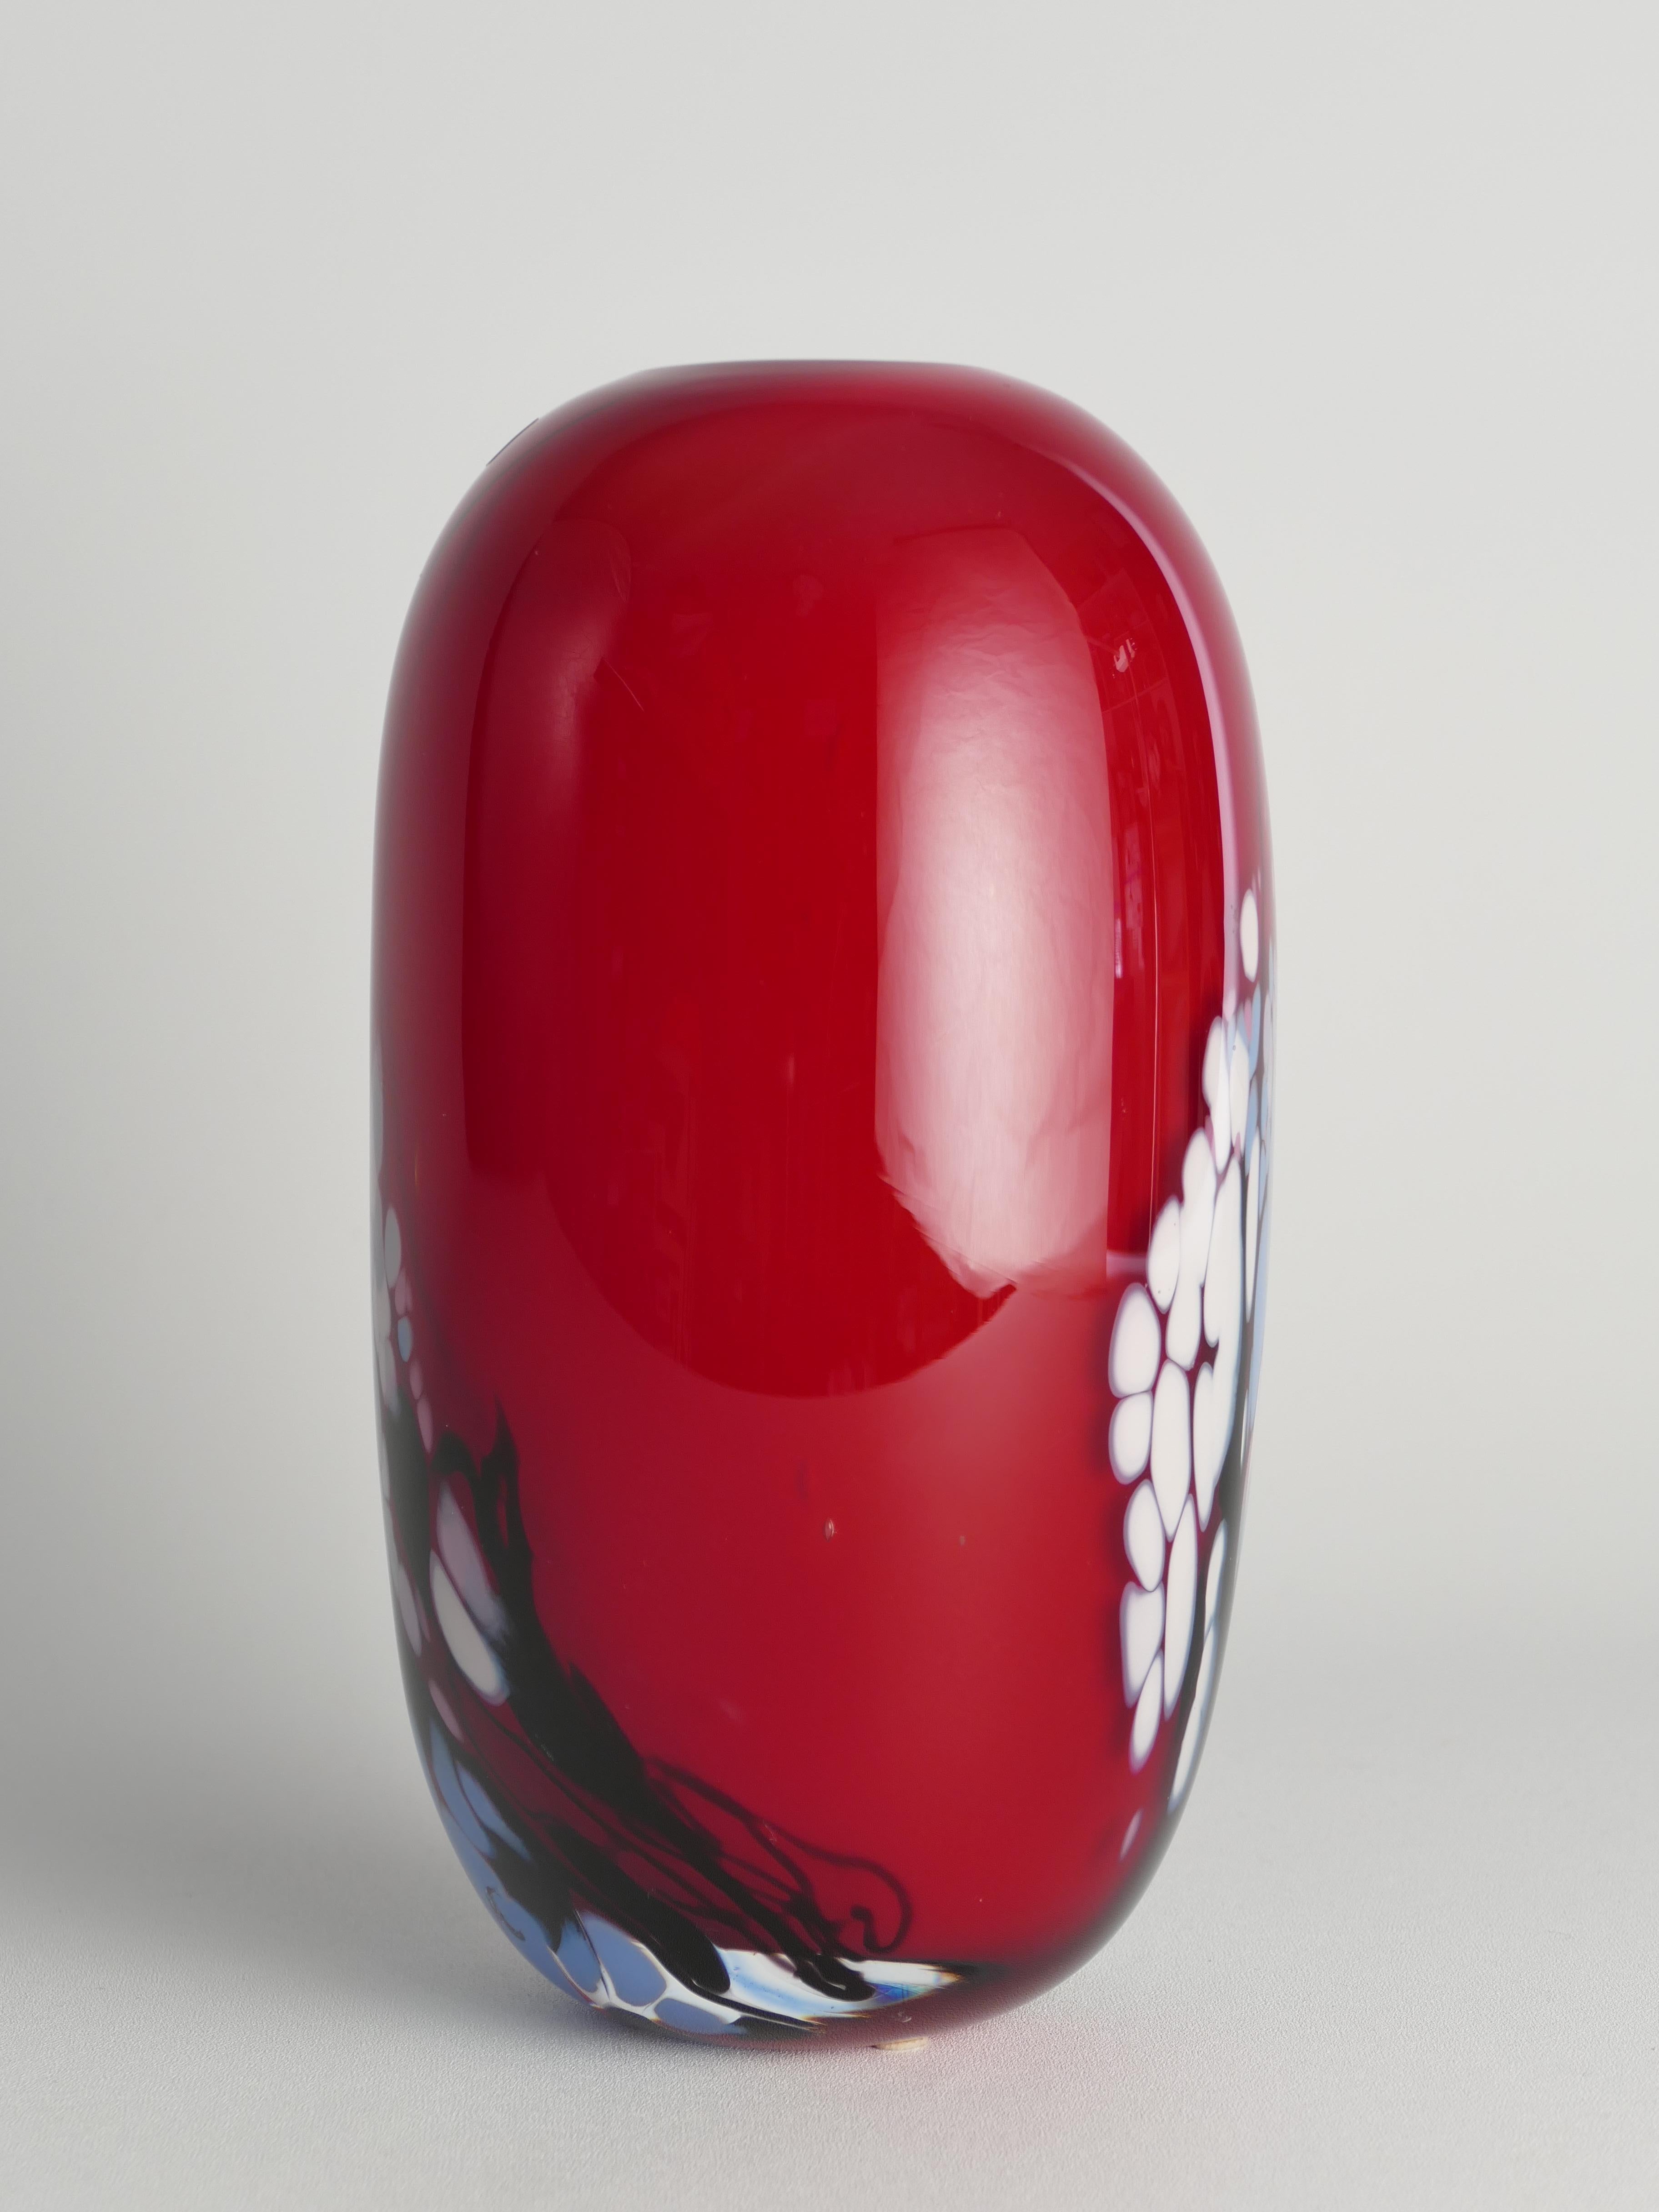 Unique Cherry Red Art Glass Vase by Mikael Axenbrant, Sweden 1990 In Good Condition For Sale In Grythyttan, SE